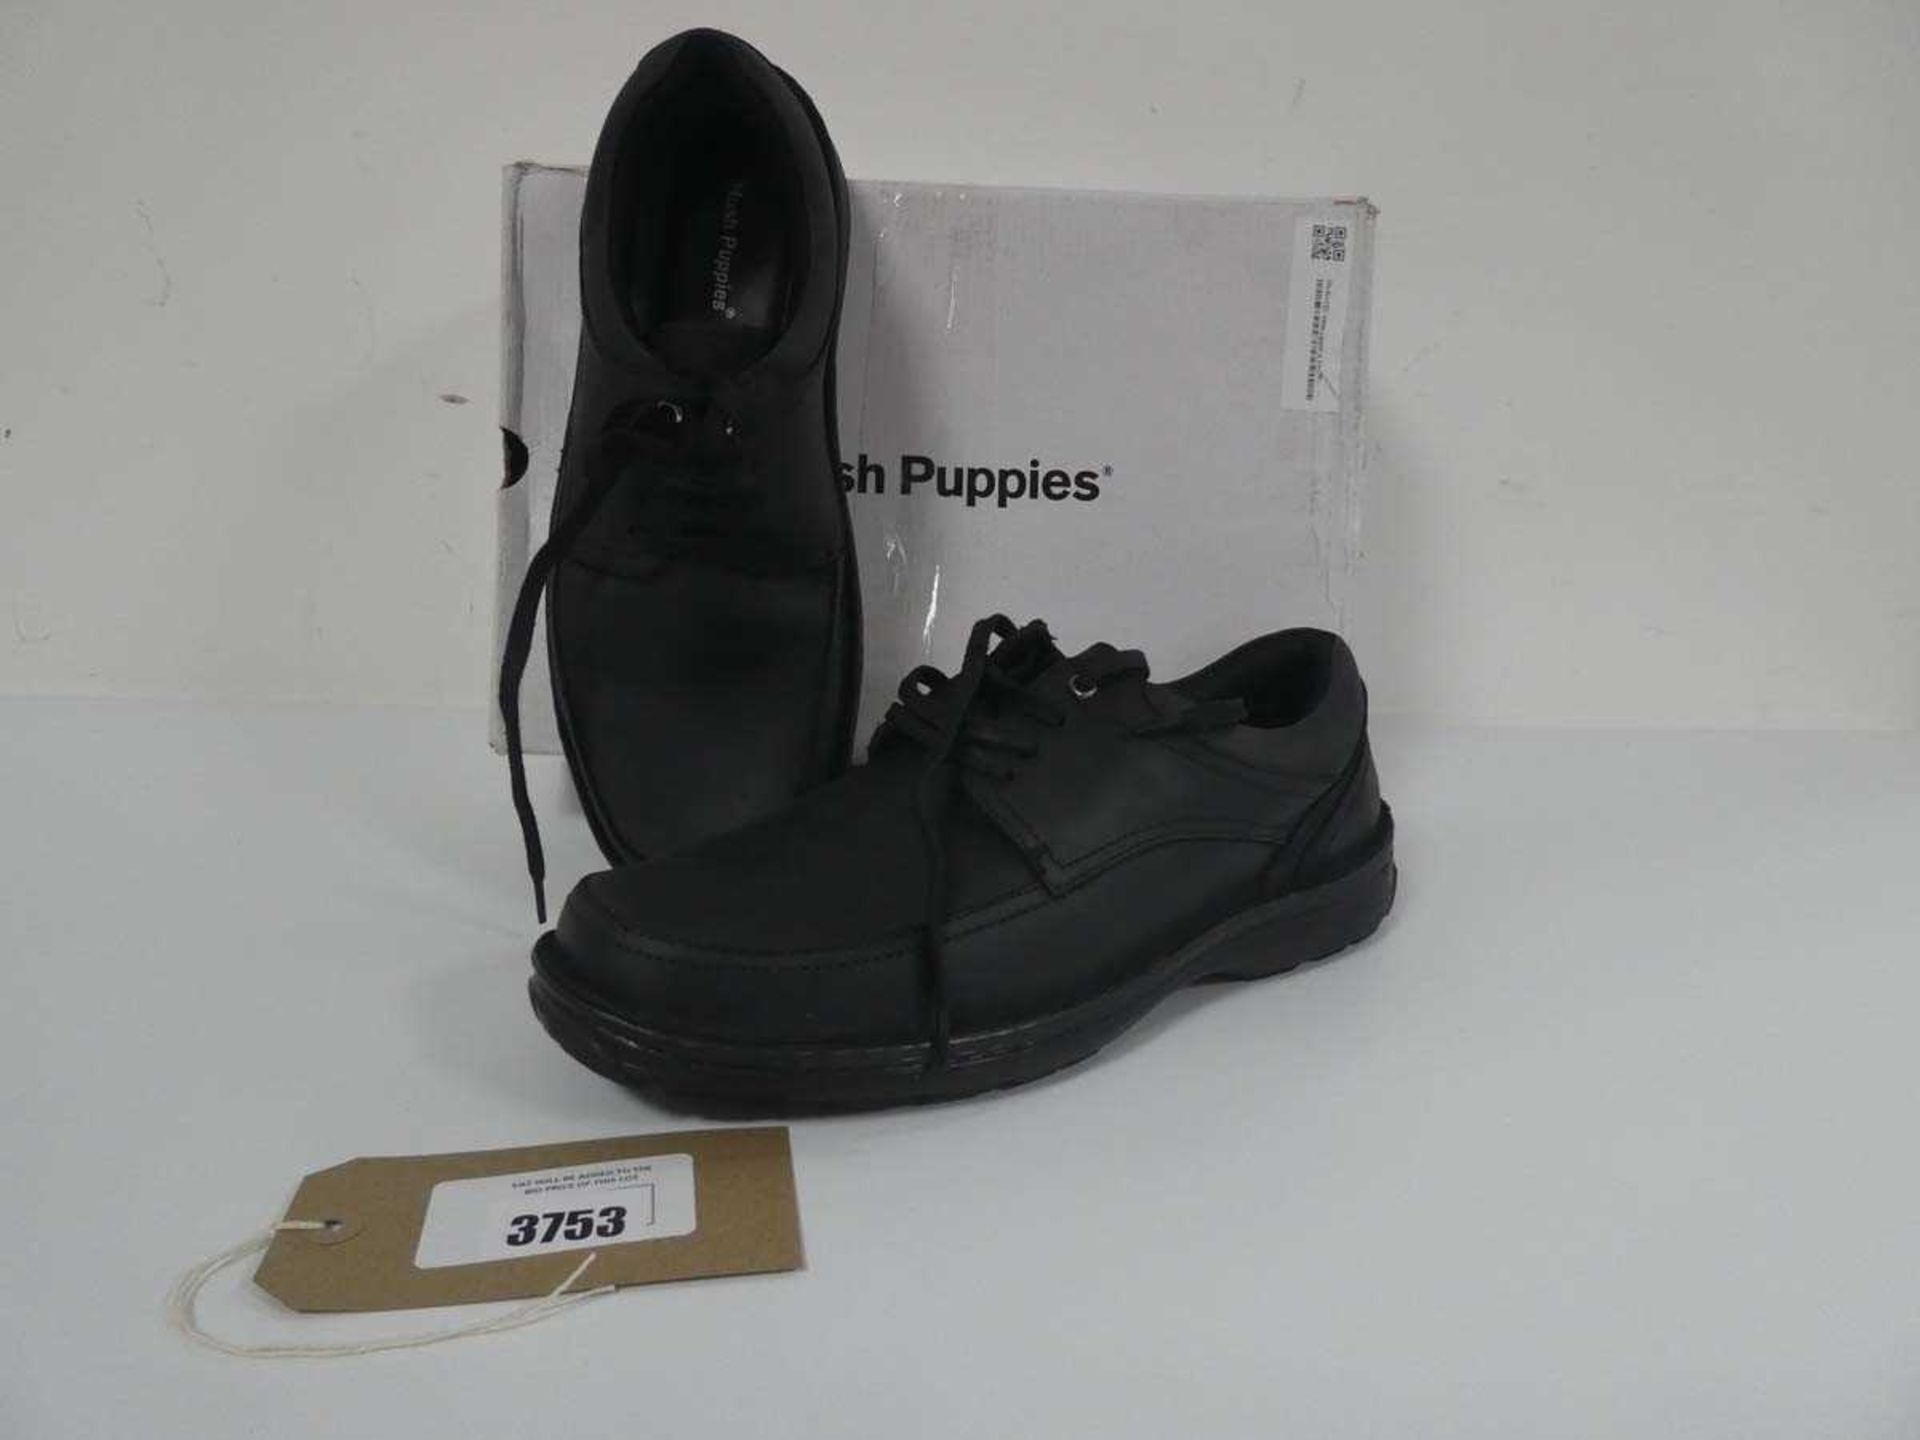 +VAT Boxed pair of Hush Puppies formal shoes in black size UK11